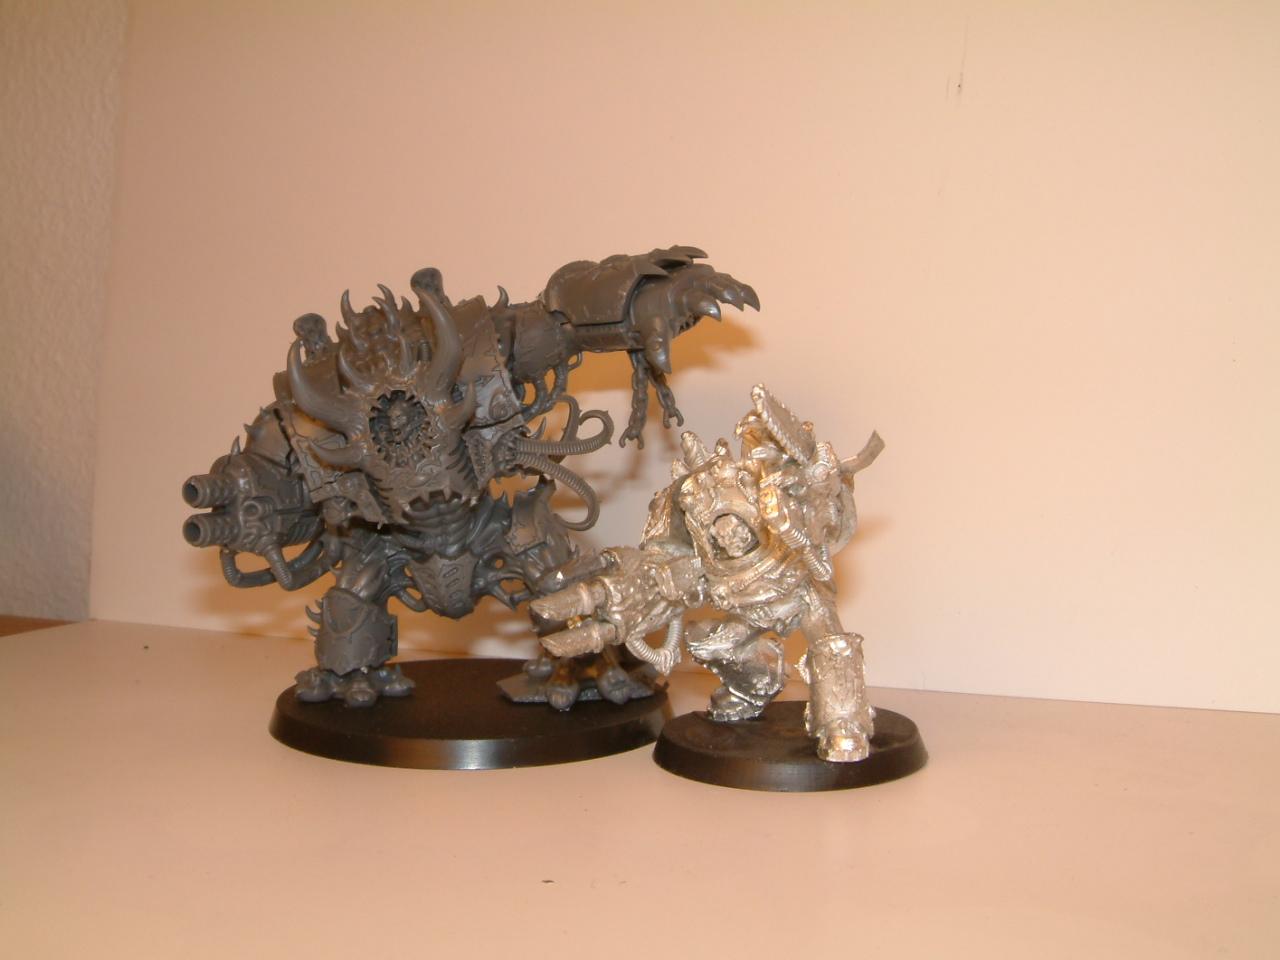 Chaos, Conversion, Crazy, Daemons, Dreadnought, Hands, Ih, Iron, Mad, Mammon, Nurgle, Parts, Sarkophagus, Scratch, Scratch Build, Space, Space Marines, Work In Progress